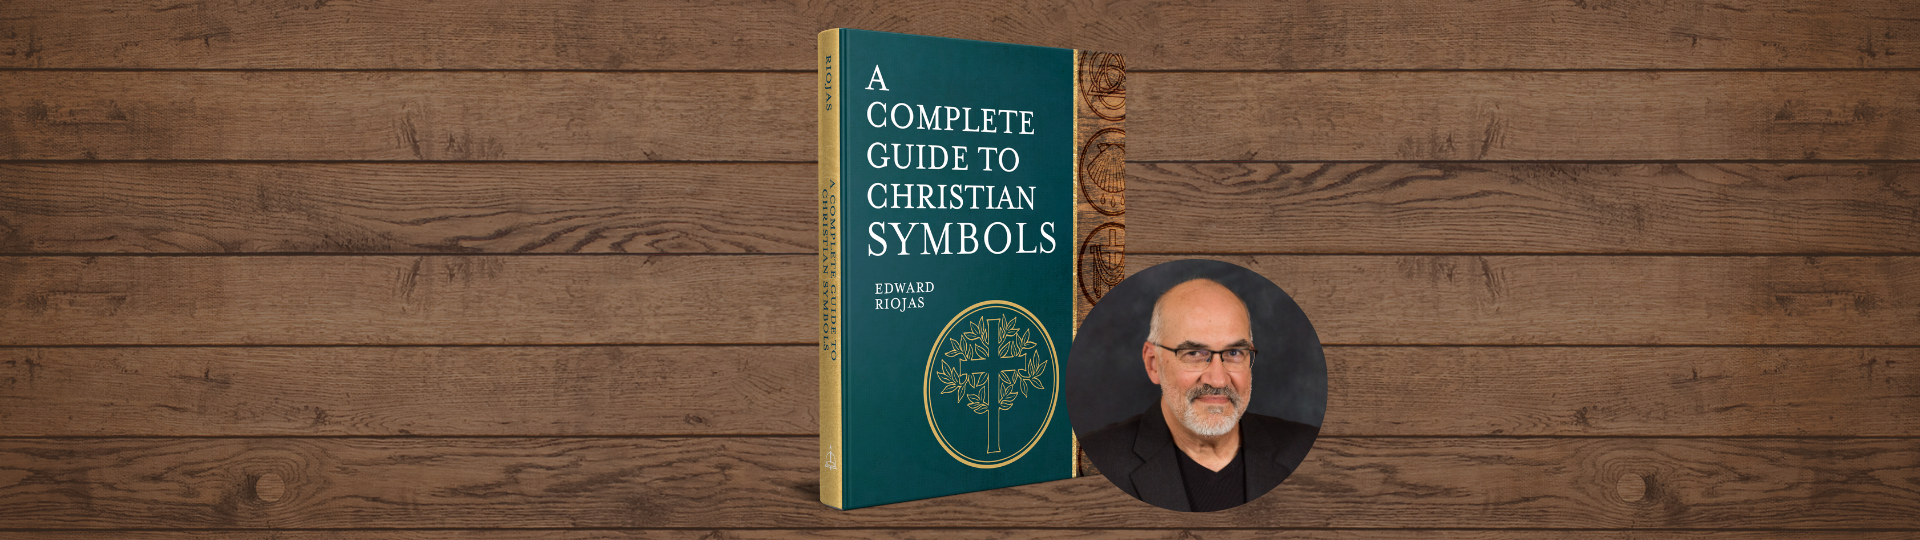 Reconnect with the Historical Symbolism of the Christian Church